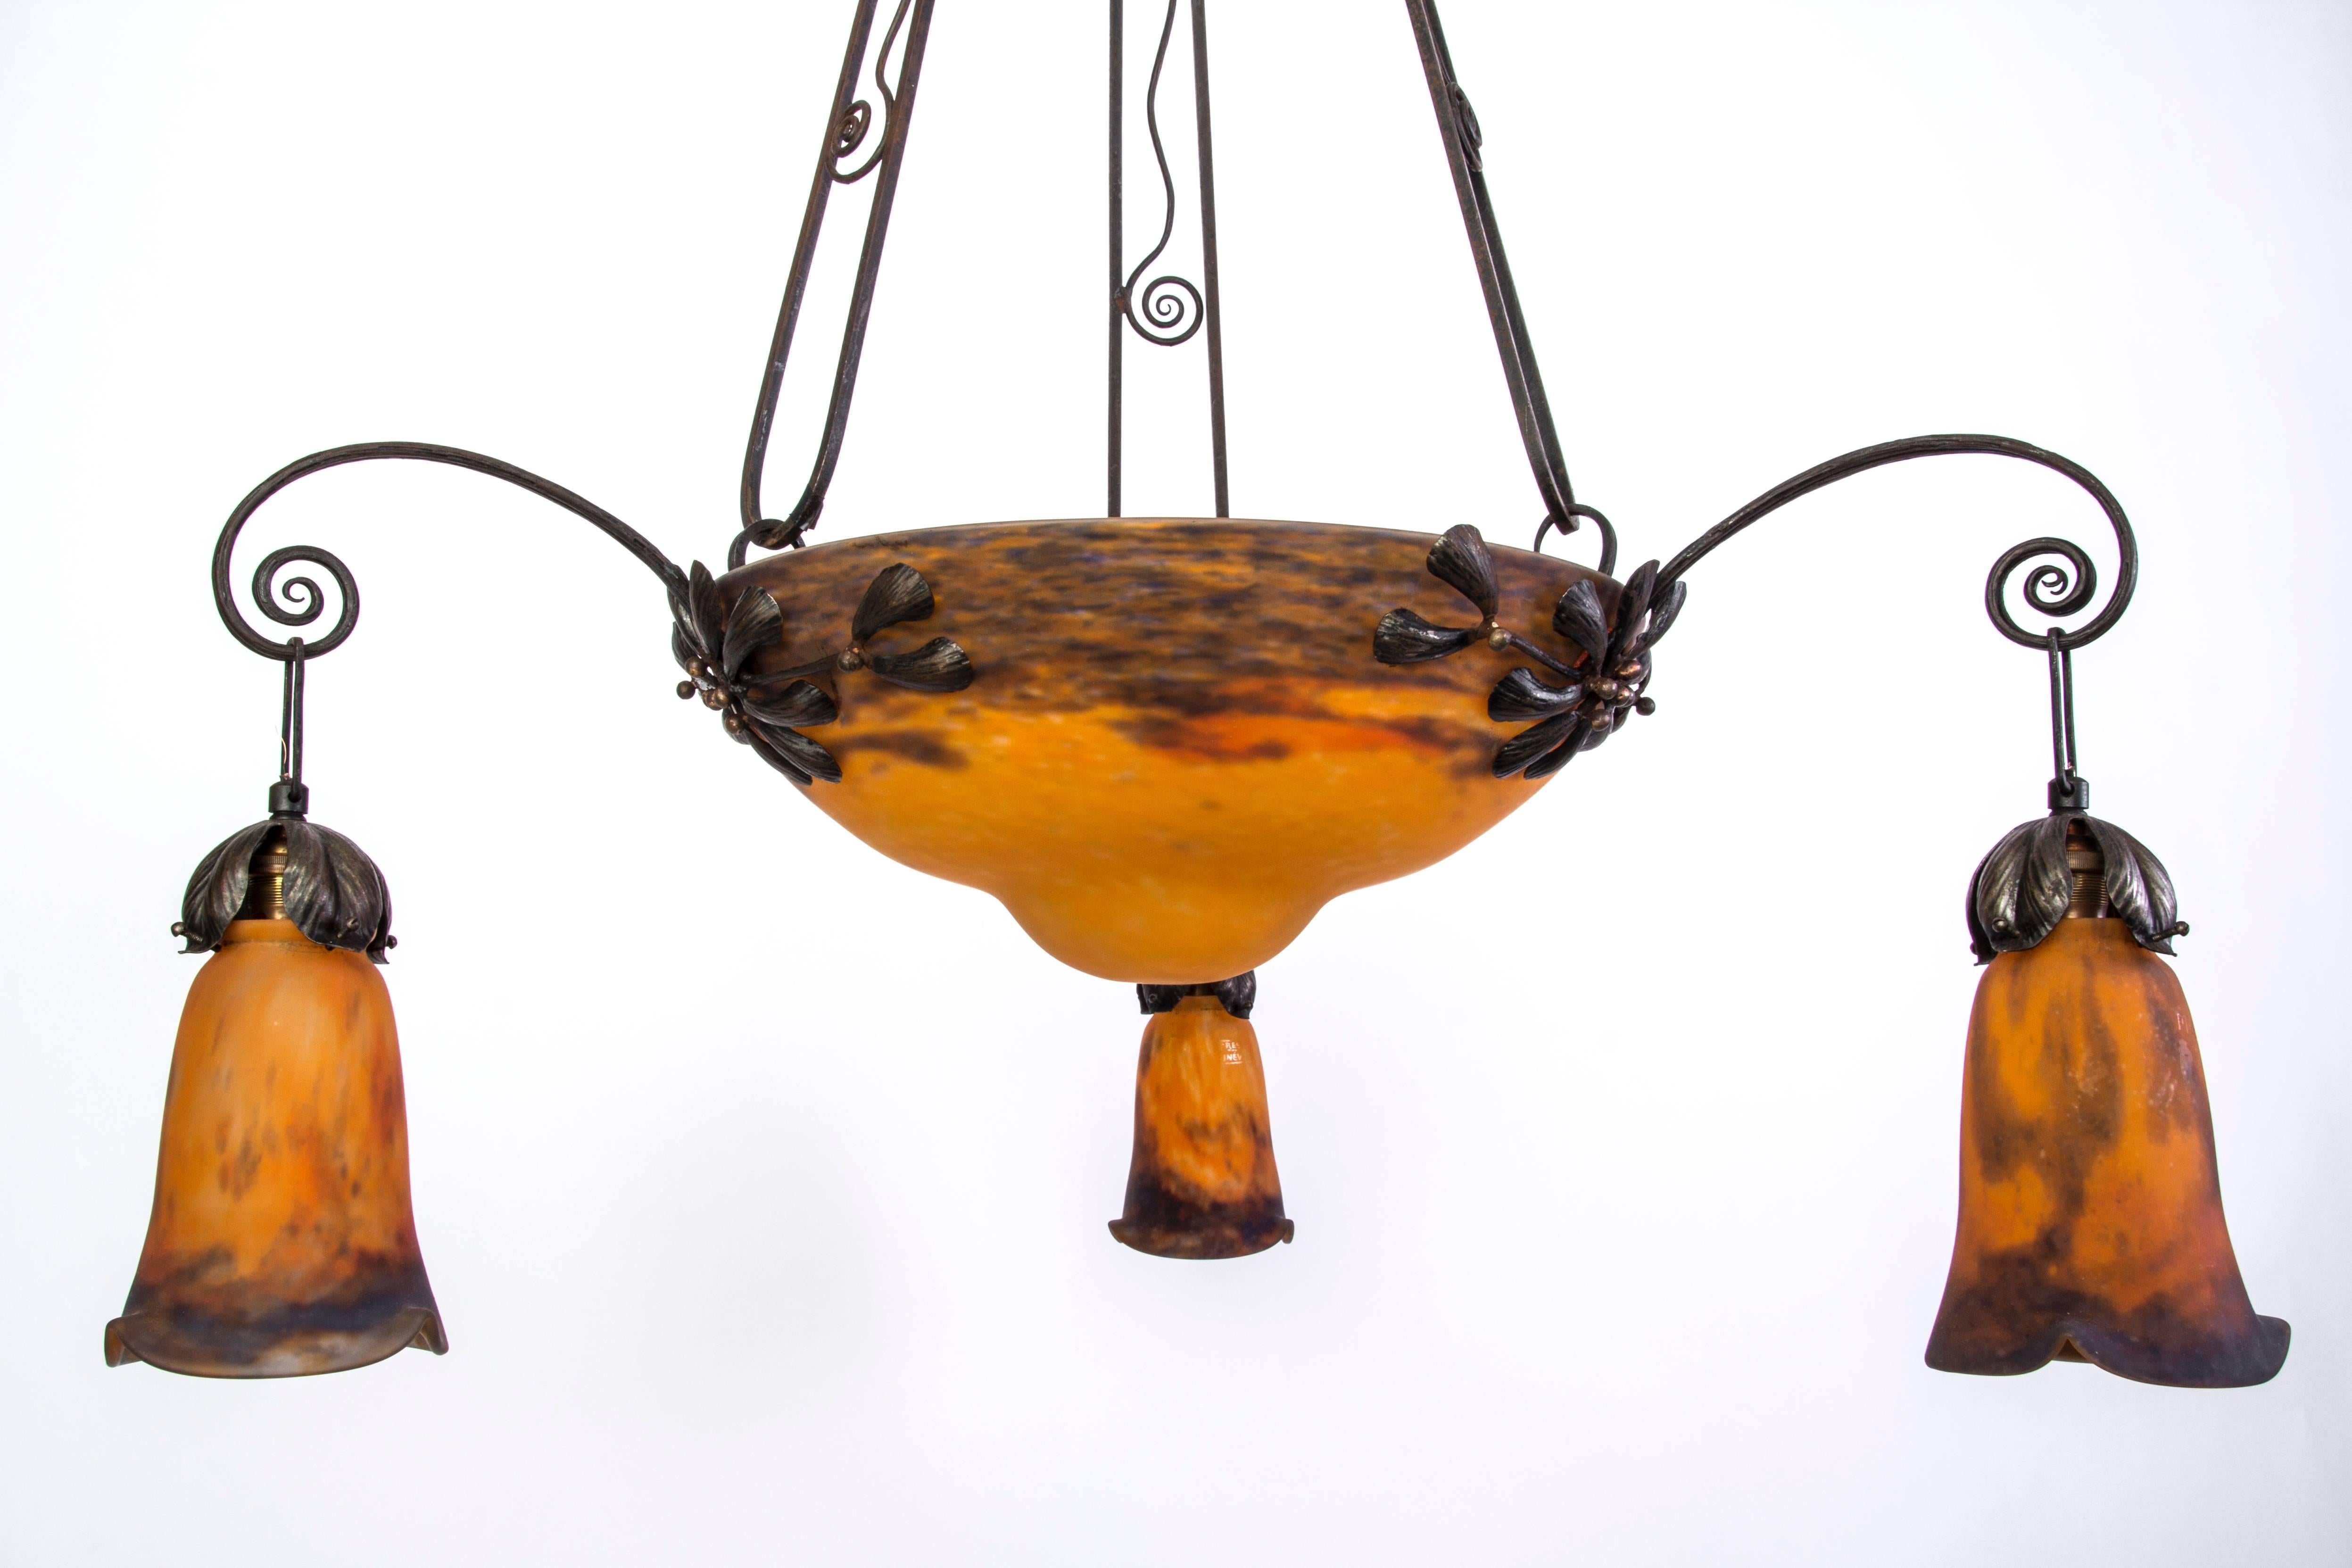 Original Art Deco chandelier from France made of wrought iron, beautifully designed and decorated. This piece is in excellent condition and features a large center bowl shade and three small shades, pâte de verre with marvellous inclusions, emitting